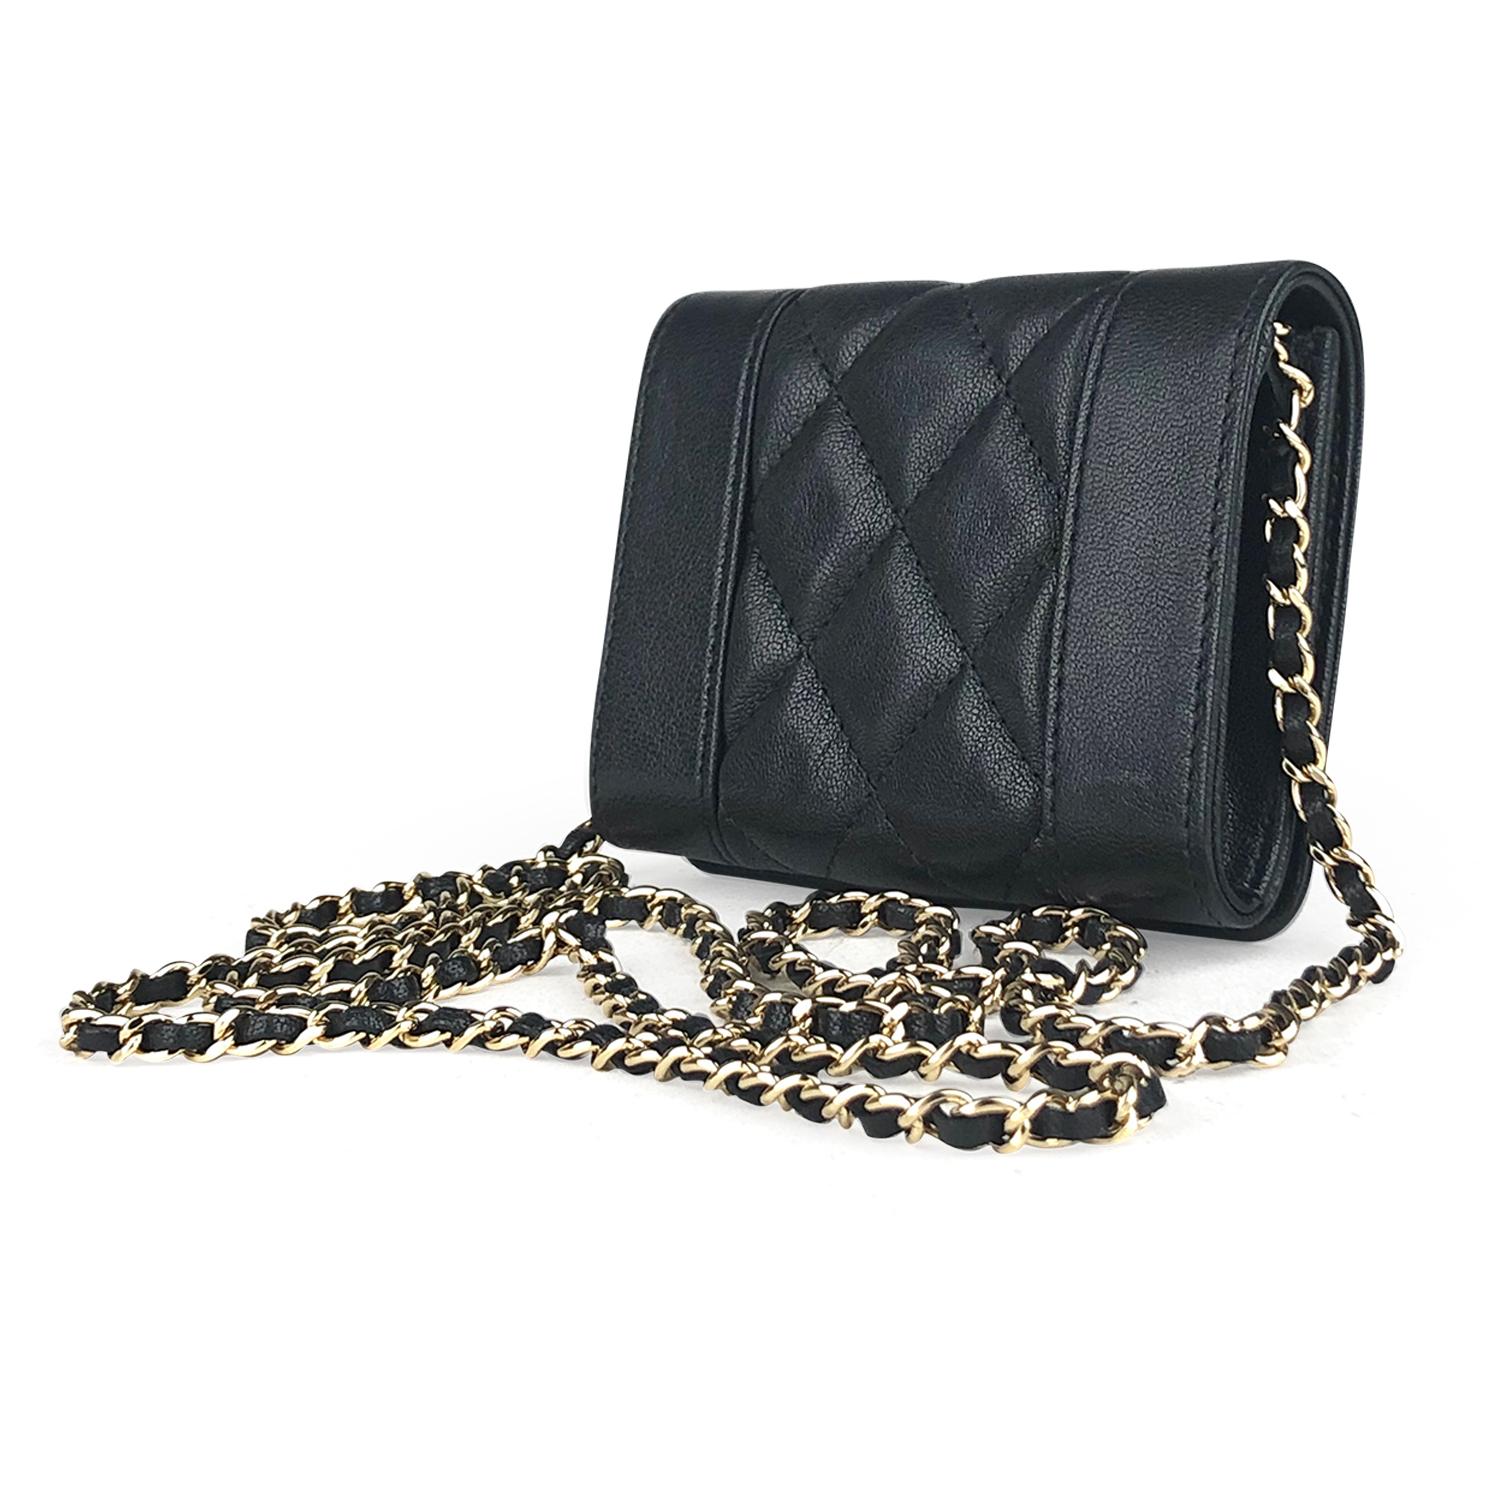 Chanel Mademoiselle Wallet on Chain Crossbody Bag In Excellent Condition For Sale In Sundbyberg, SE